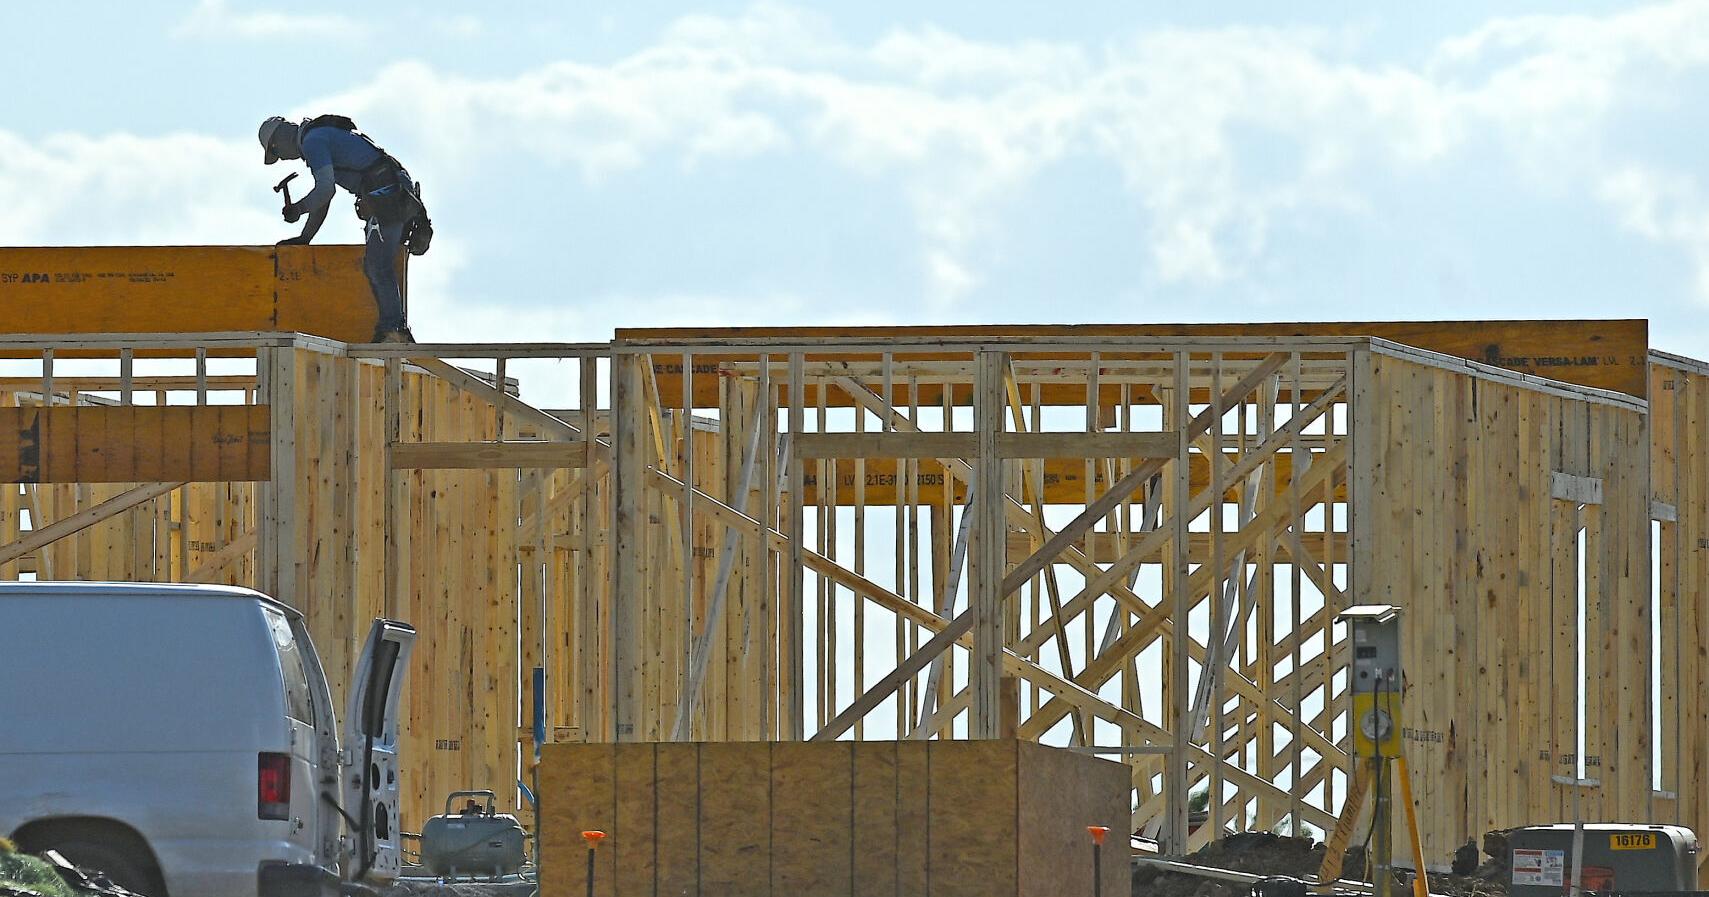 To tackle high housing costs, Texas lawmakers push to build more homes